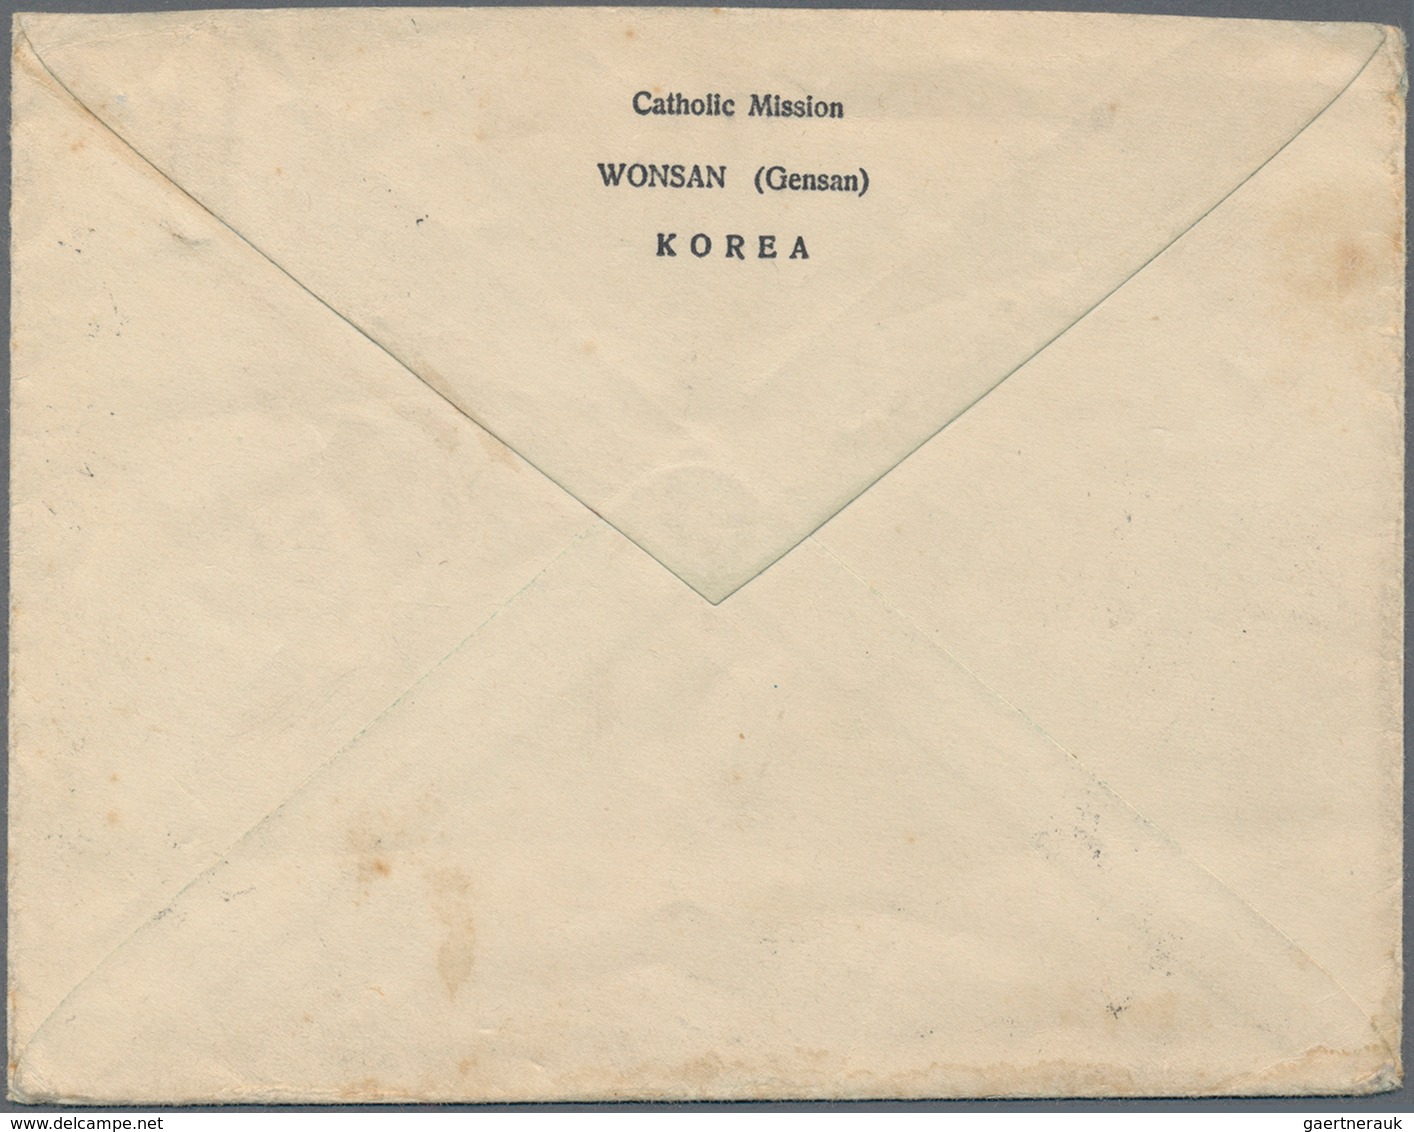 Japanische Post In Korea: 1930/33, Catholic Mission Wonsan/Korea: Cover W. Two Cpl. Commemorative Se - Military Service Stamps